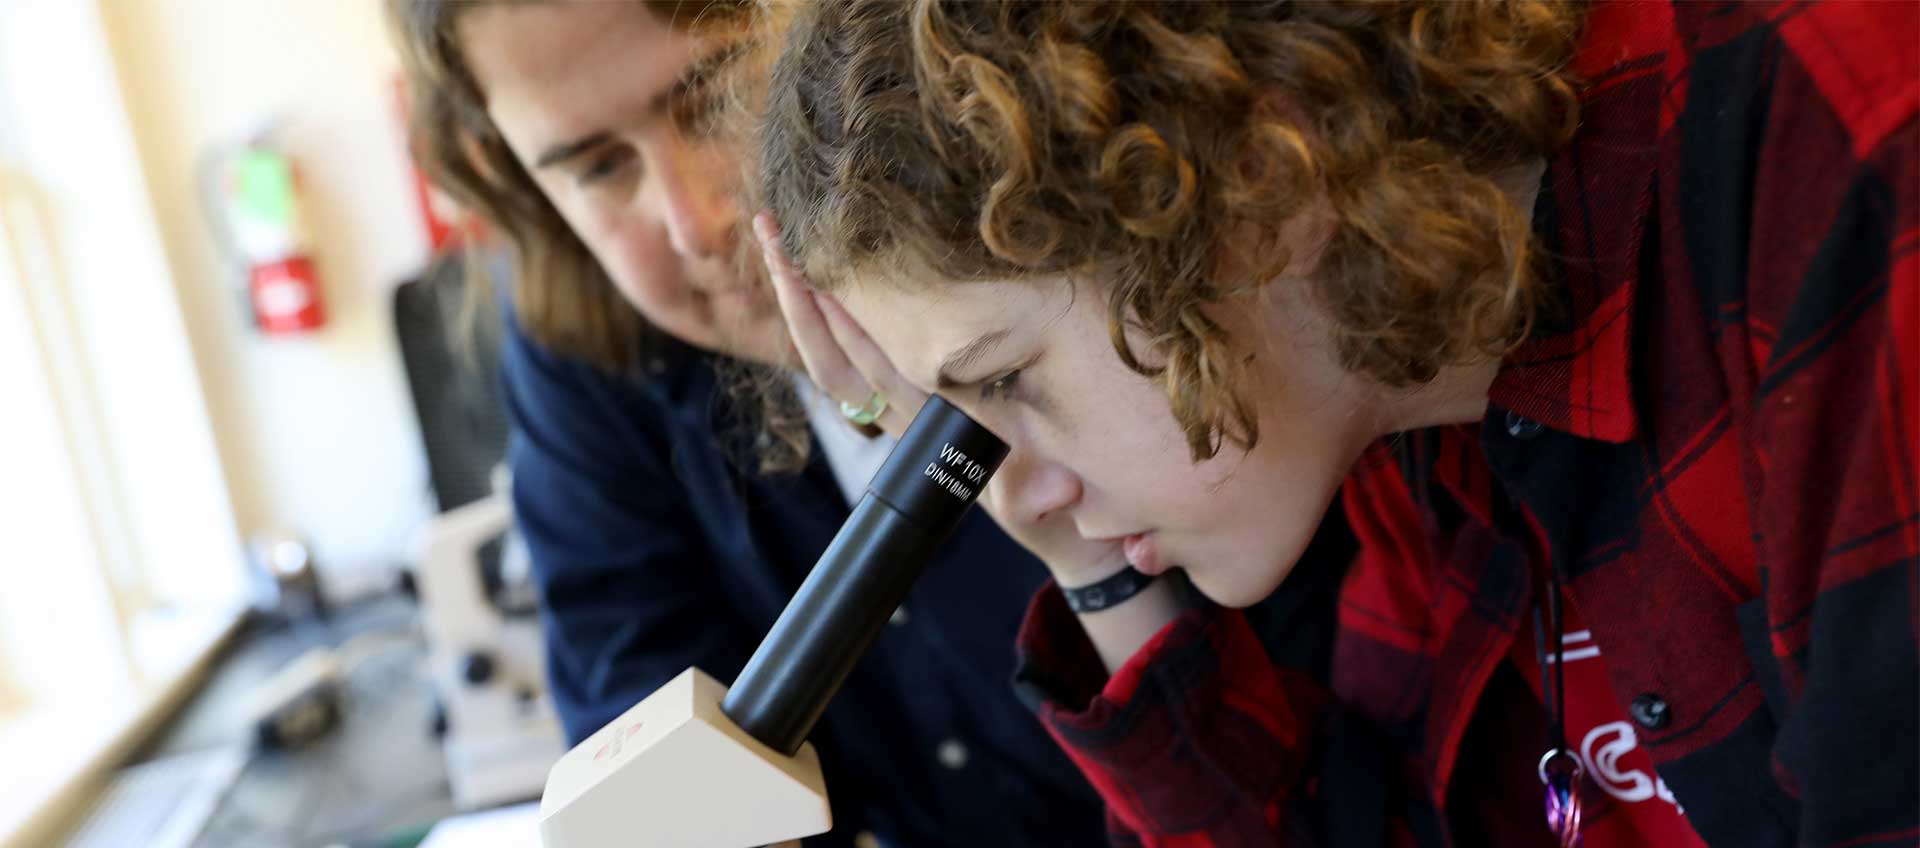 A student and teacher use a microscope in the science lab